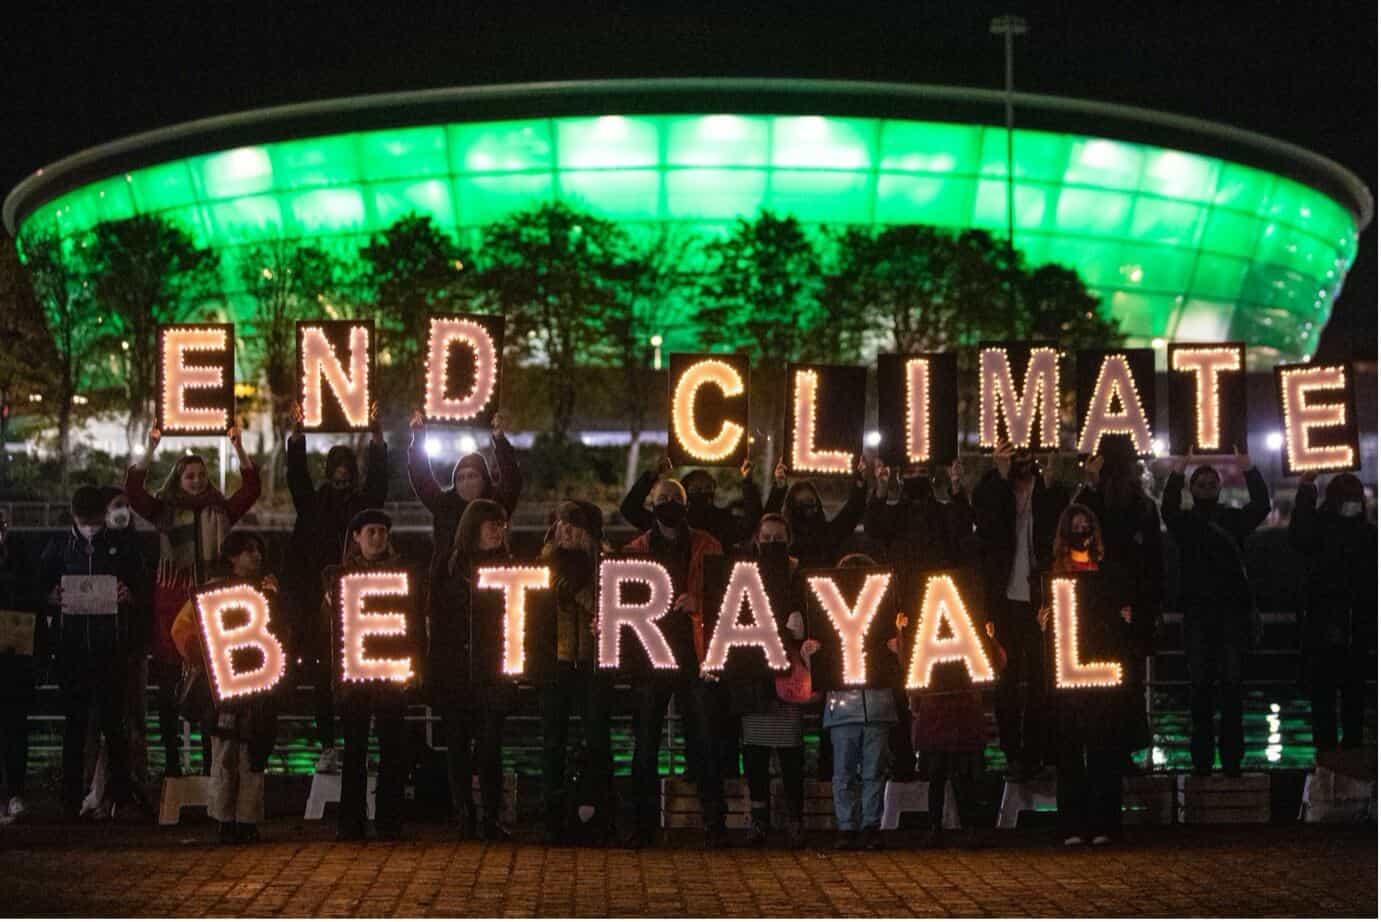 "End Climate Betrayal"